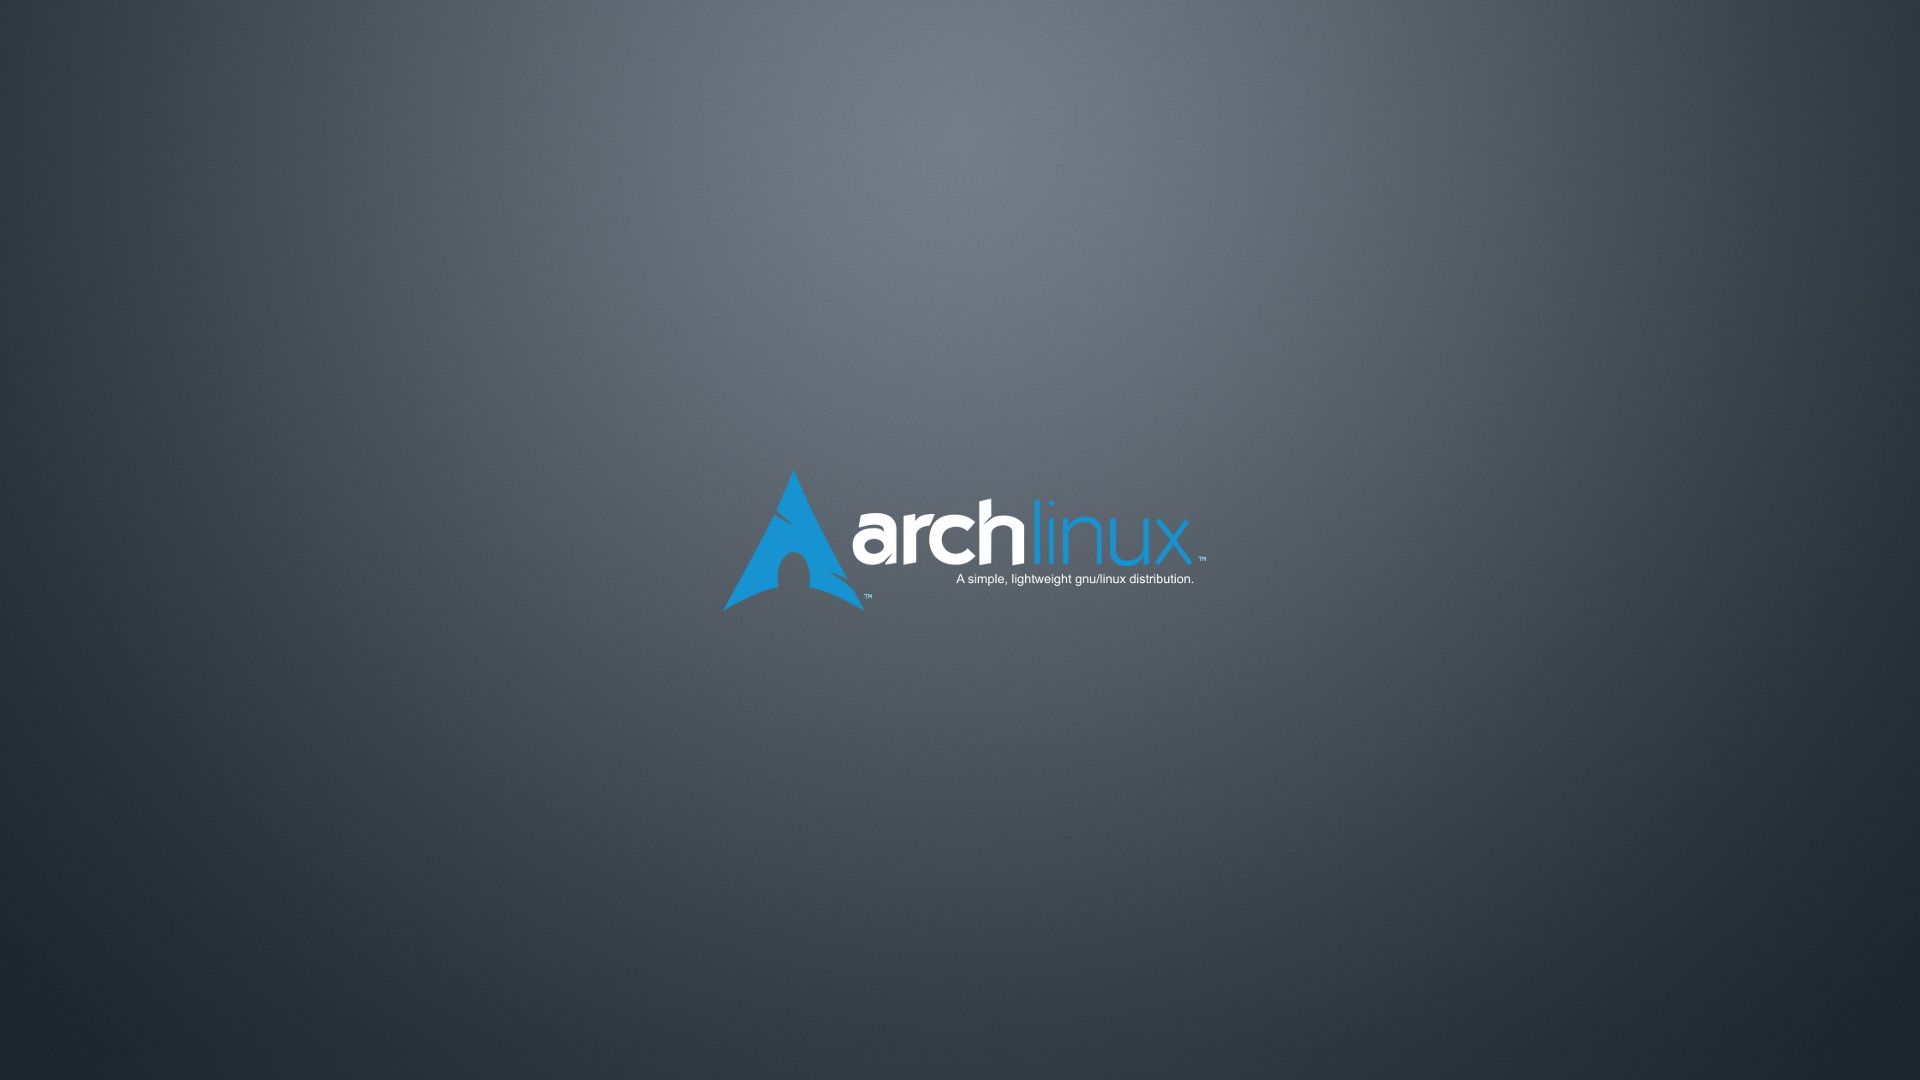 Arch background image